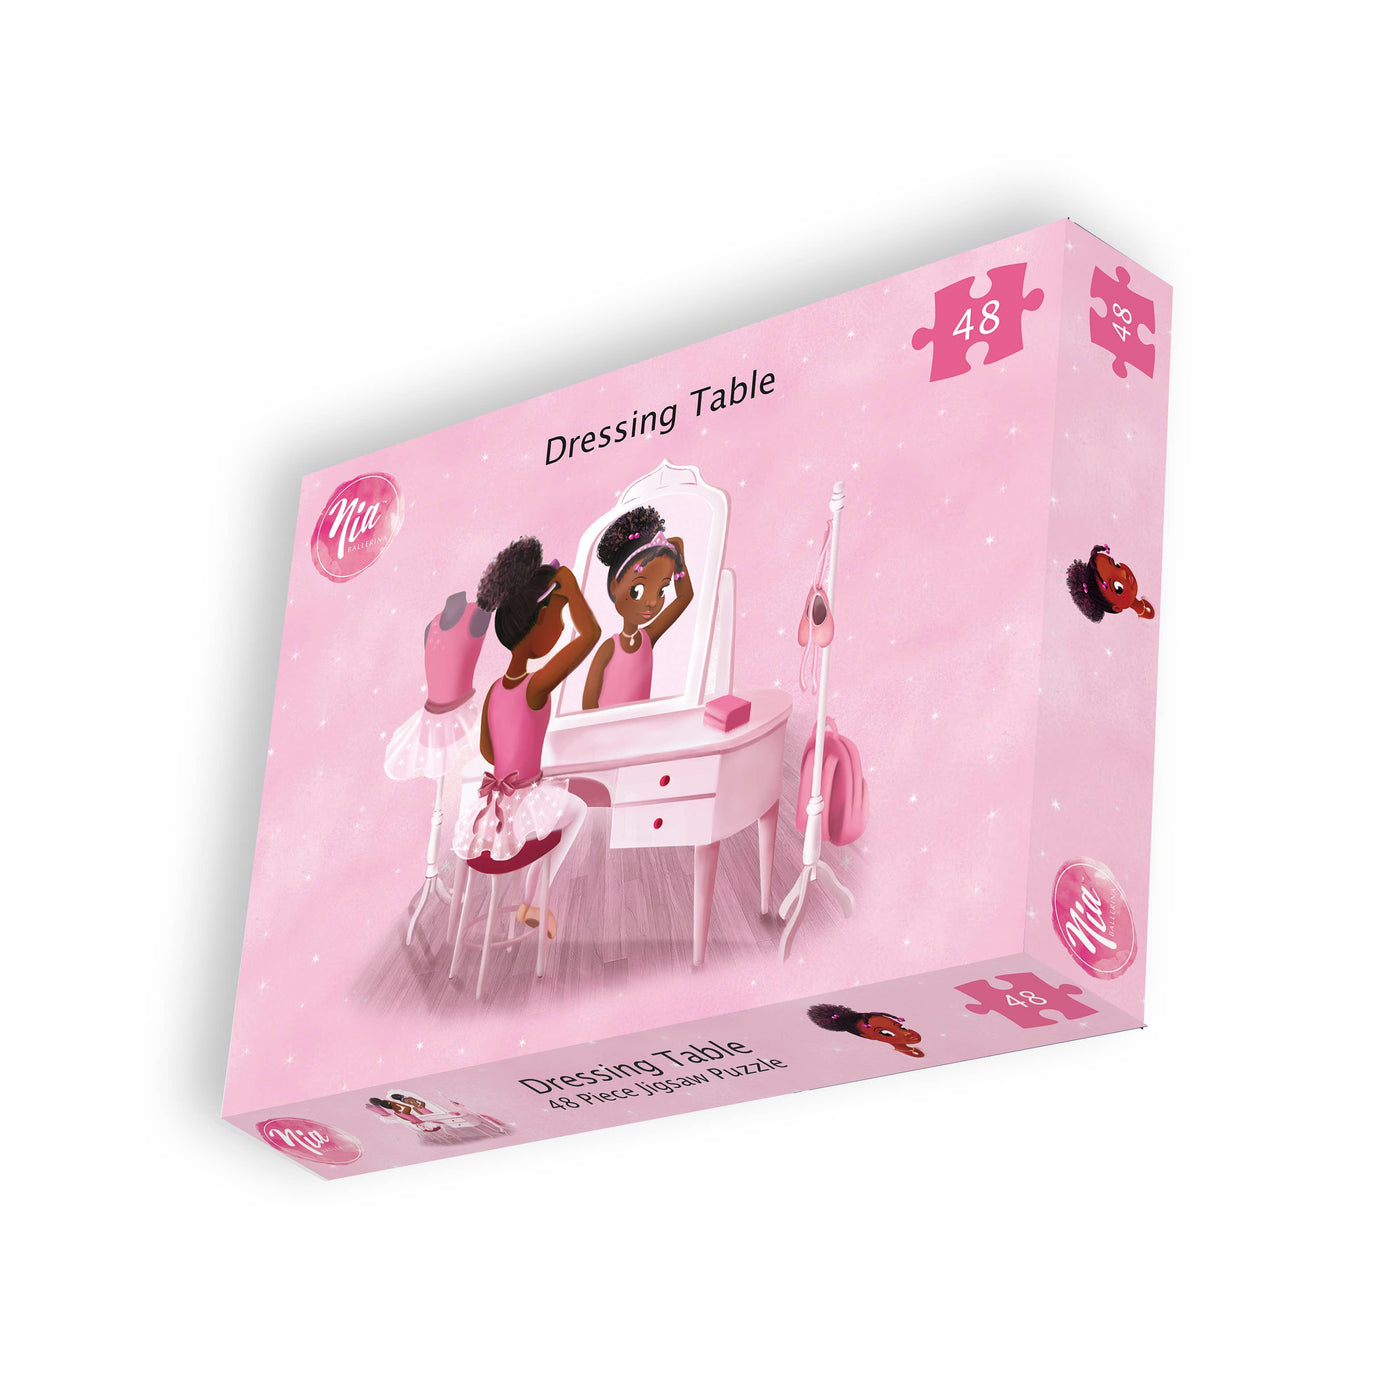 Dressing Table Jigsaw Puzzle